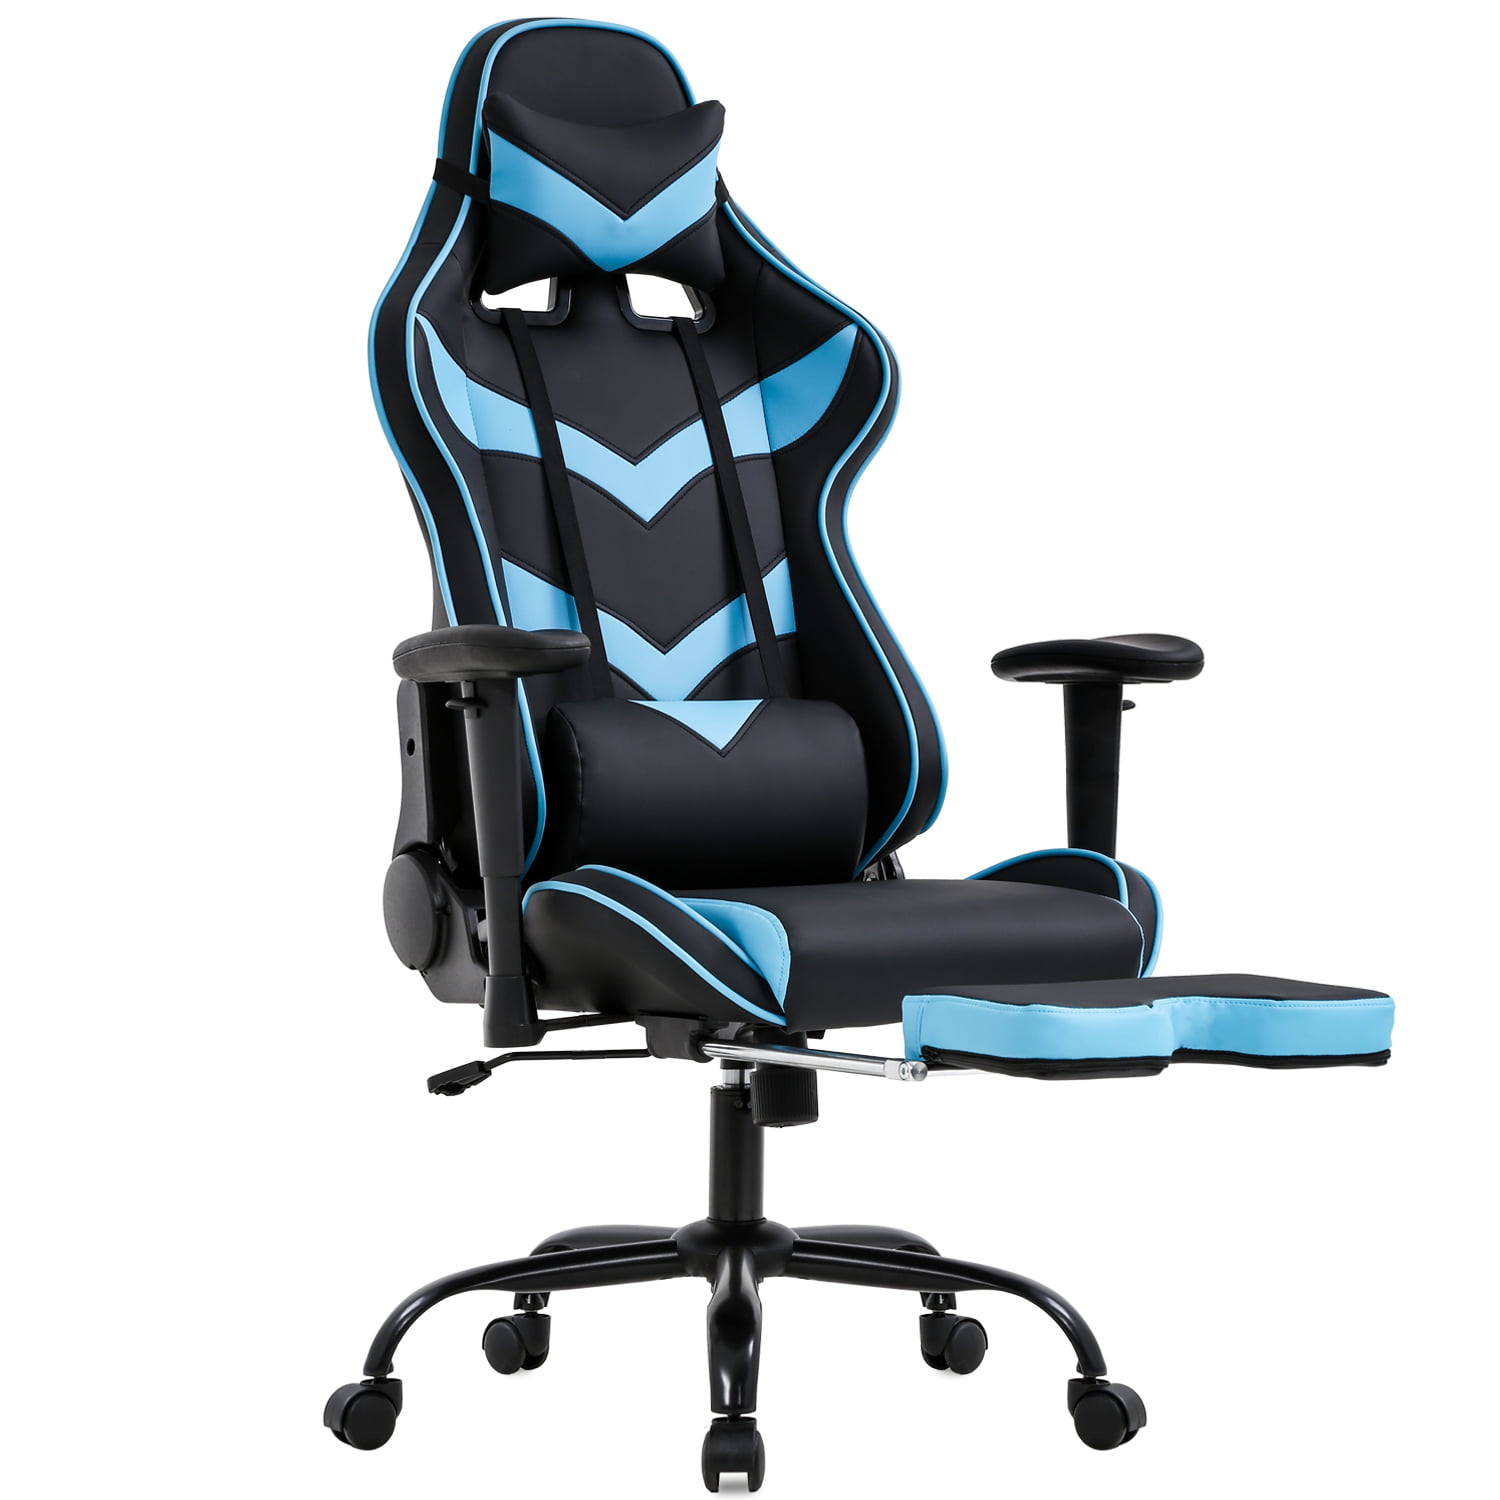 Blue Gaming Chair Massaging Office Chair Racing Computer Chair with Lumbar Support Footrest Armrest Headrest Ergonomic Desk Chair Task High Back PU Executive Rolling Swivel Chair for Adults Women